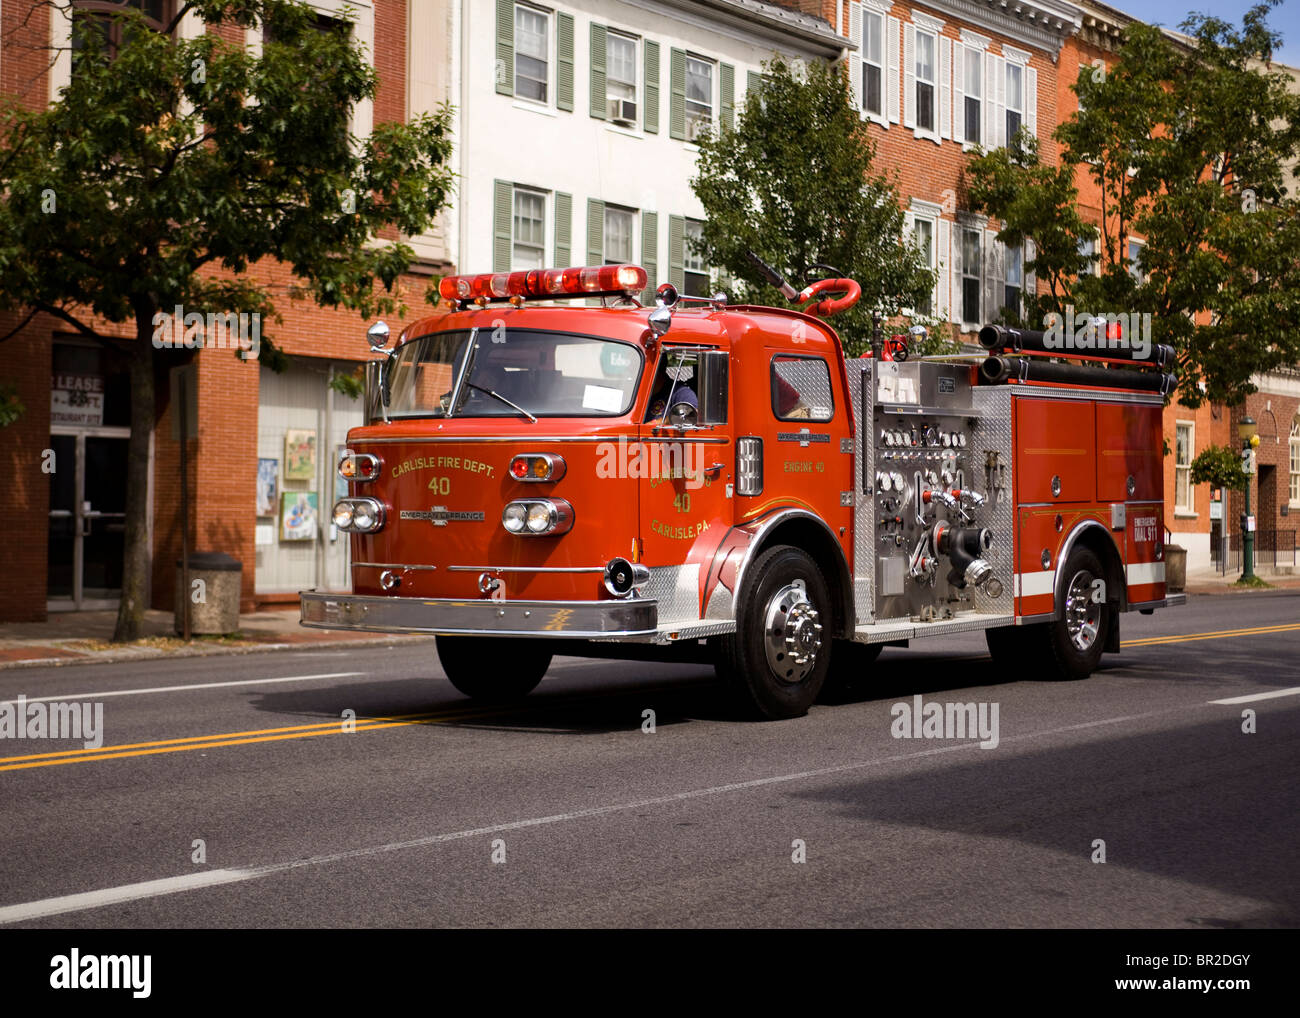 American LaFrance vintage fire truck - New York, USA Banque D'Images